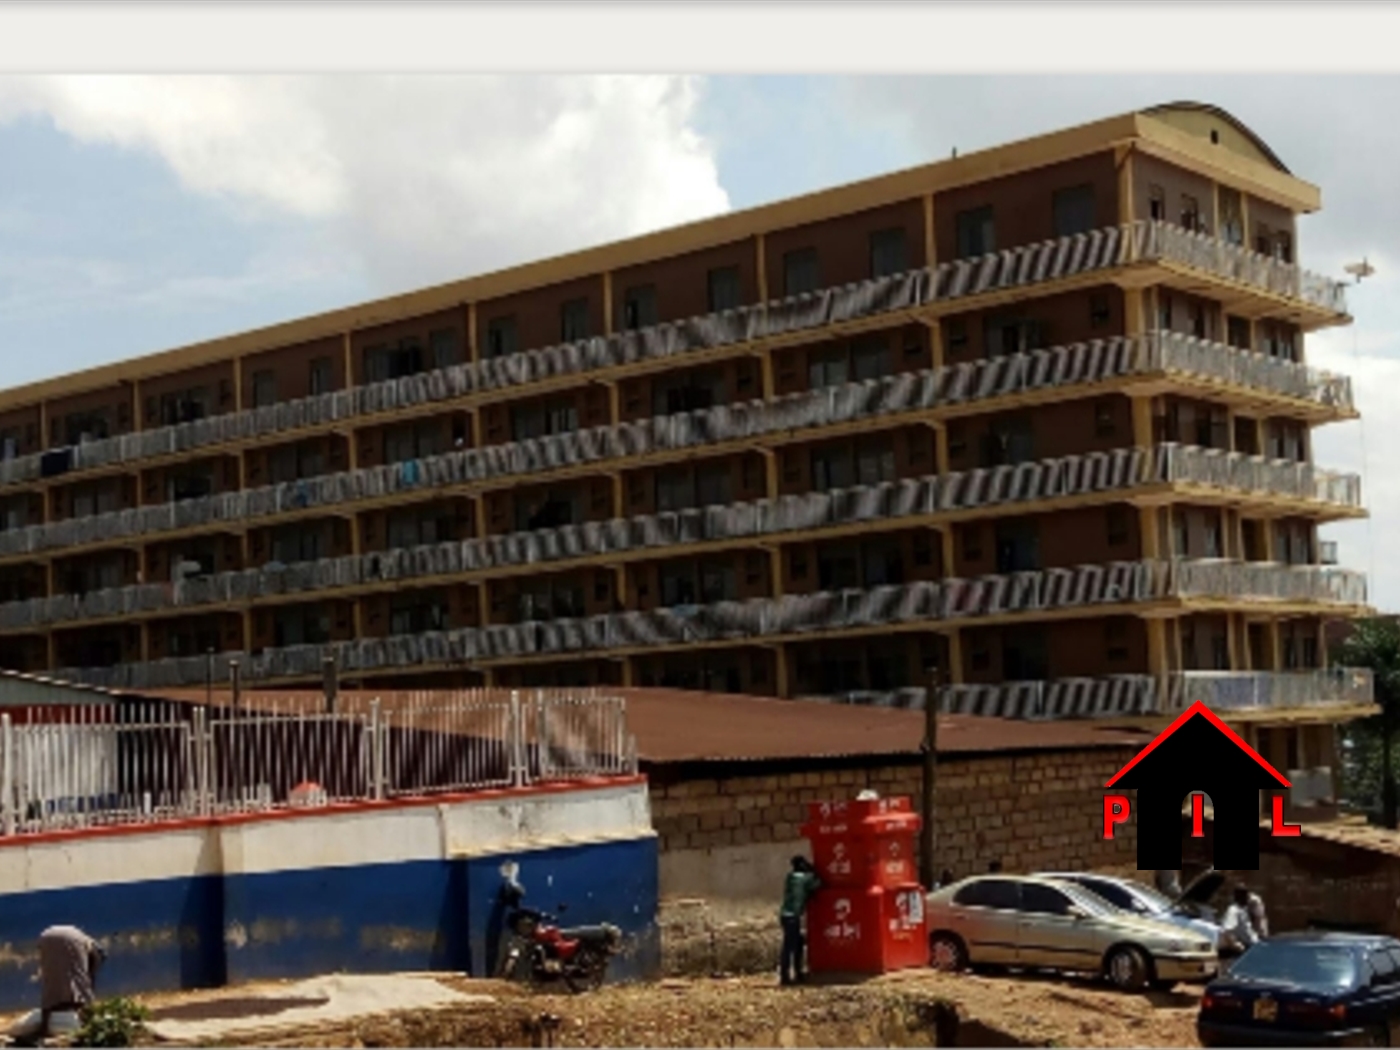 Commercial Land for sale in Aruapark Kampala